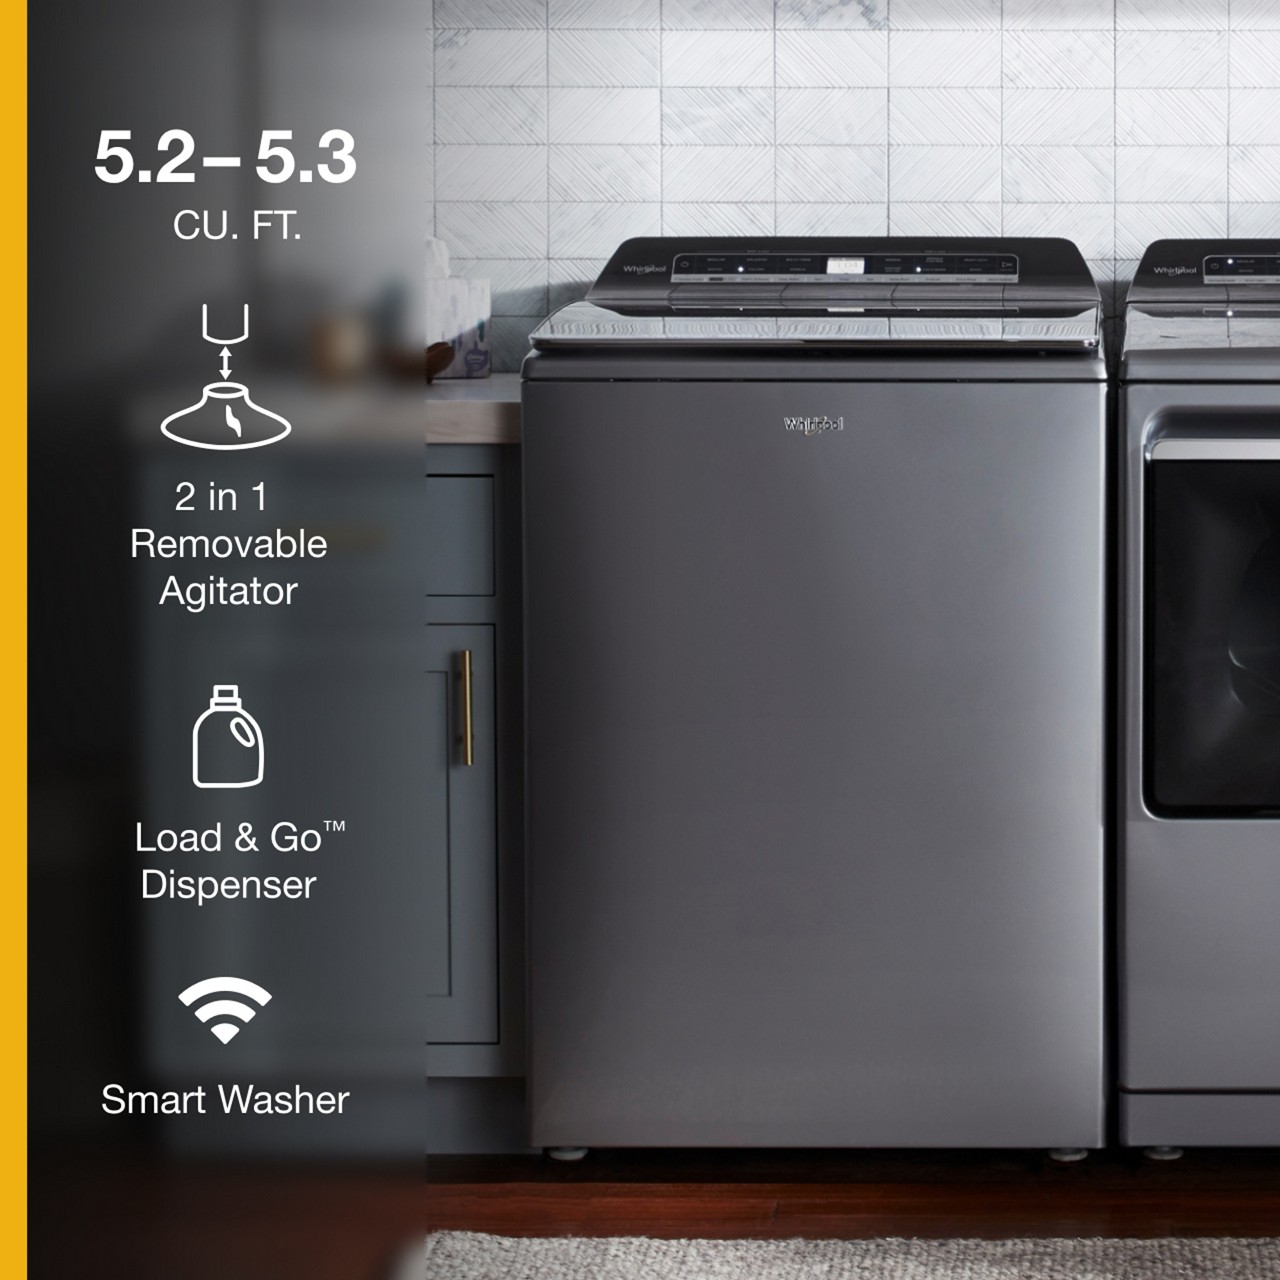 Buy Whirlpool 5.2 – 5.3 cu. ft. Top Load Washer with 2 in 1